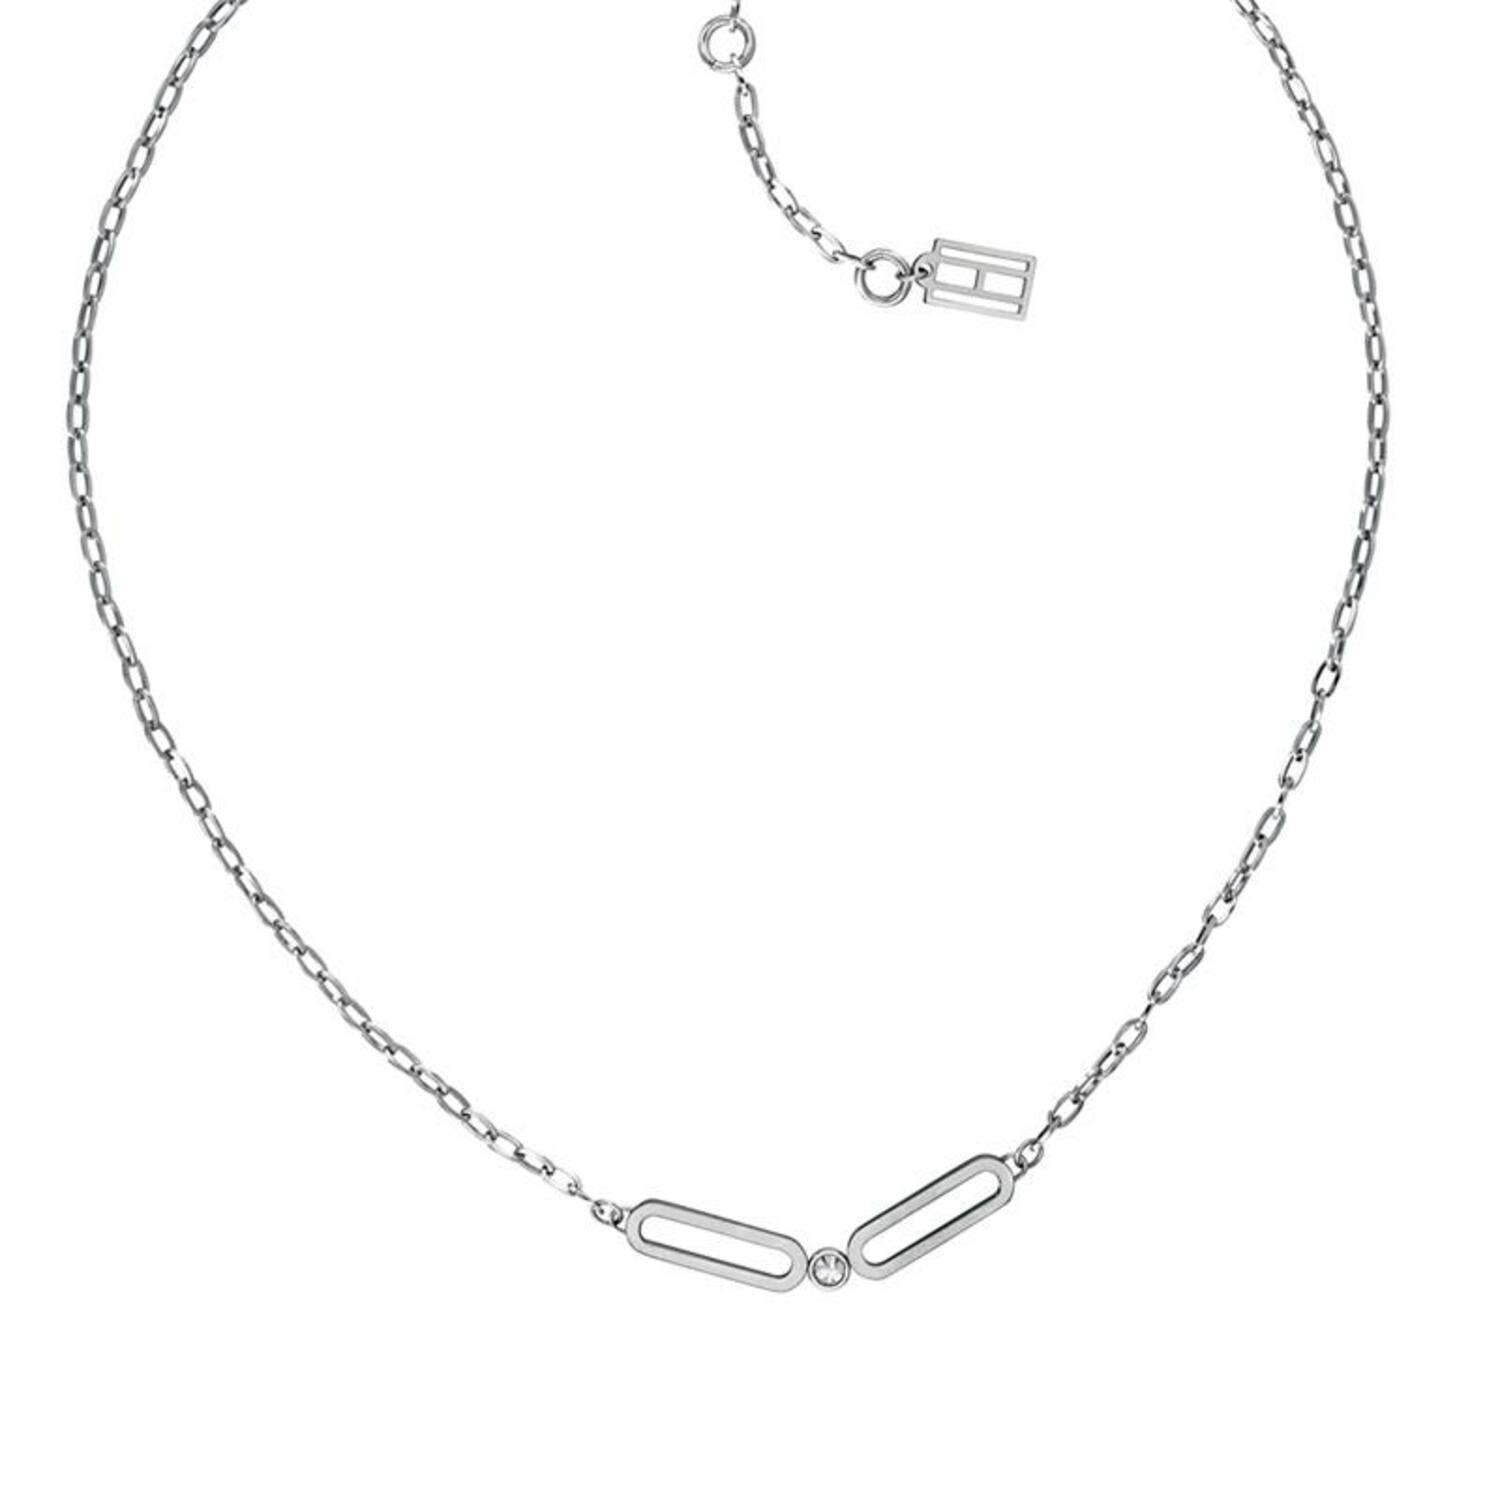  Collier - Staal - 43cm